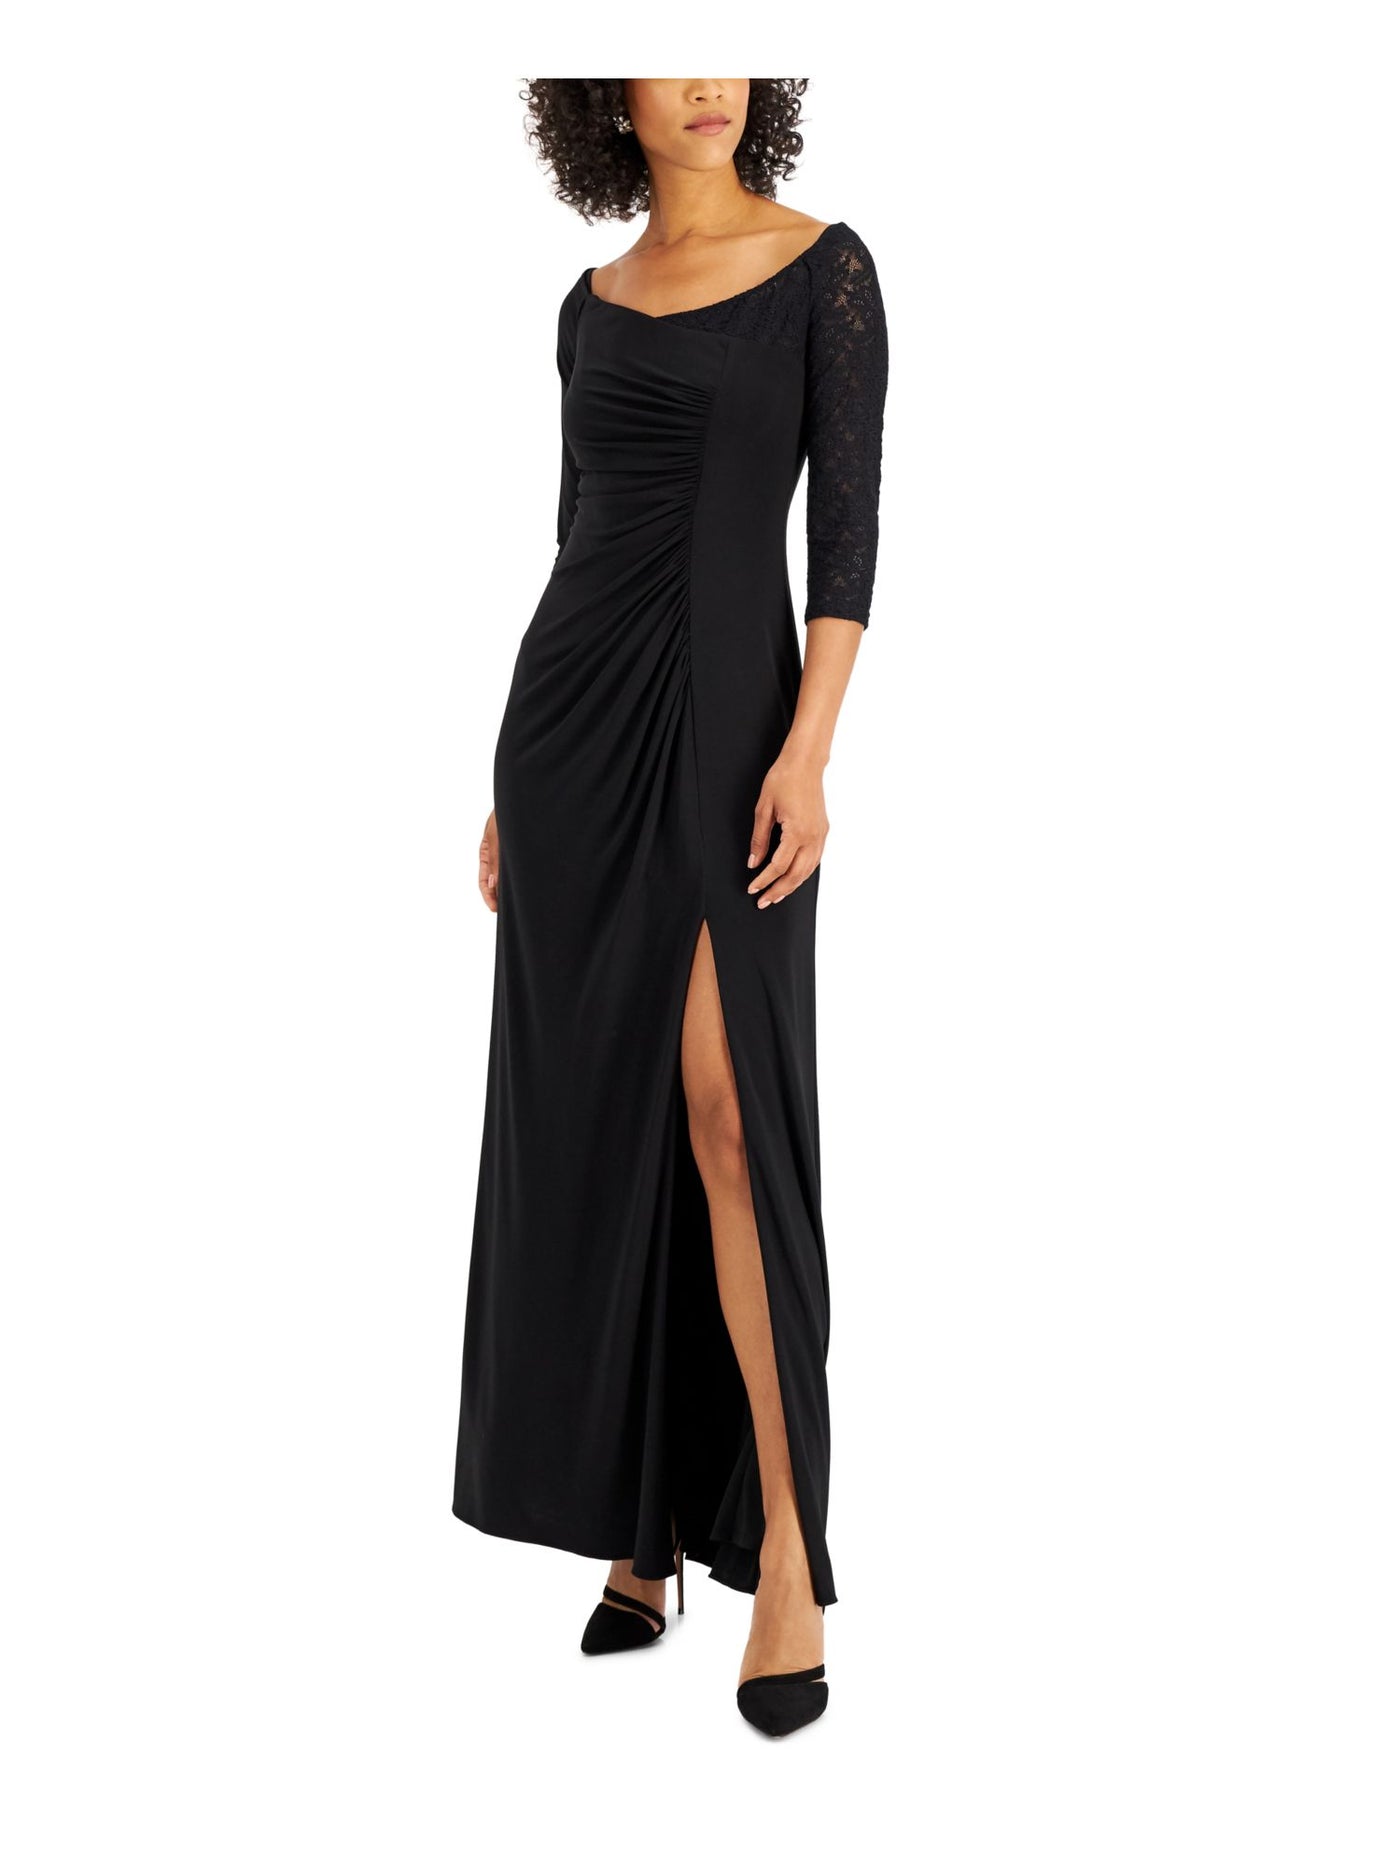 ADRIANNA PAPELL Womens Black Slitted Lace Zippered Lined 3/4 Sleeve Scoop Neck Full-Length Evening Gown Dress 10